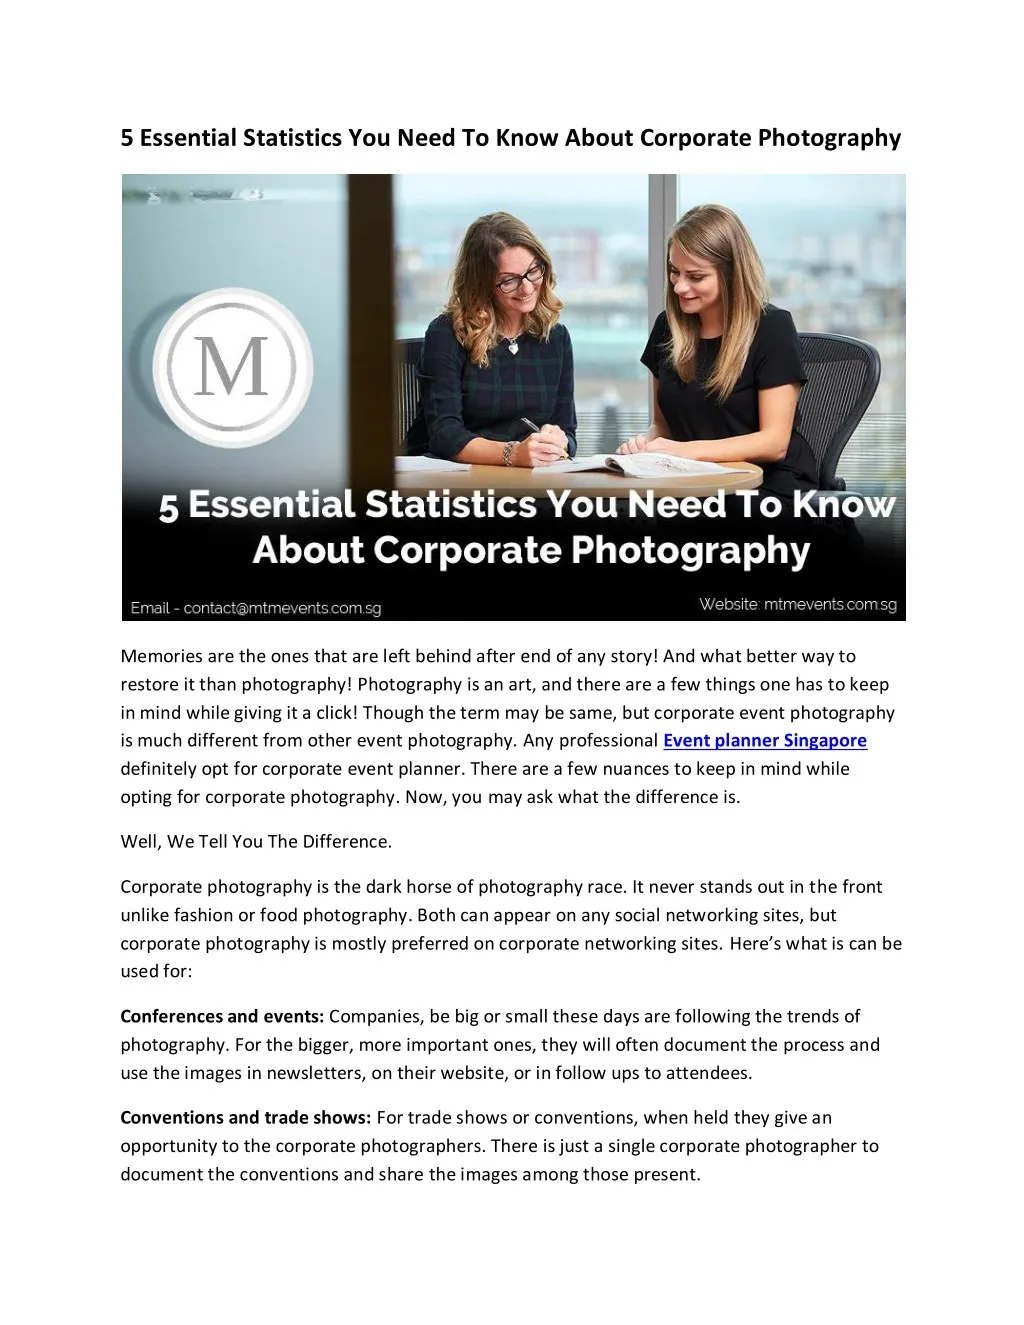 5 essential statistics you need to know about